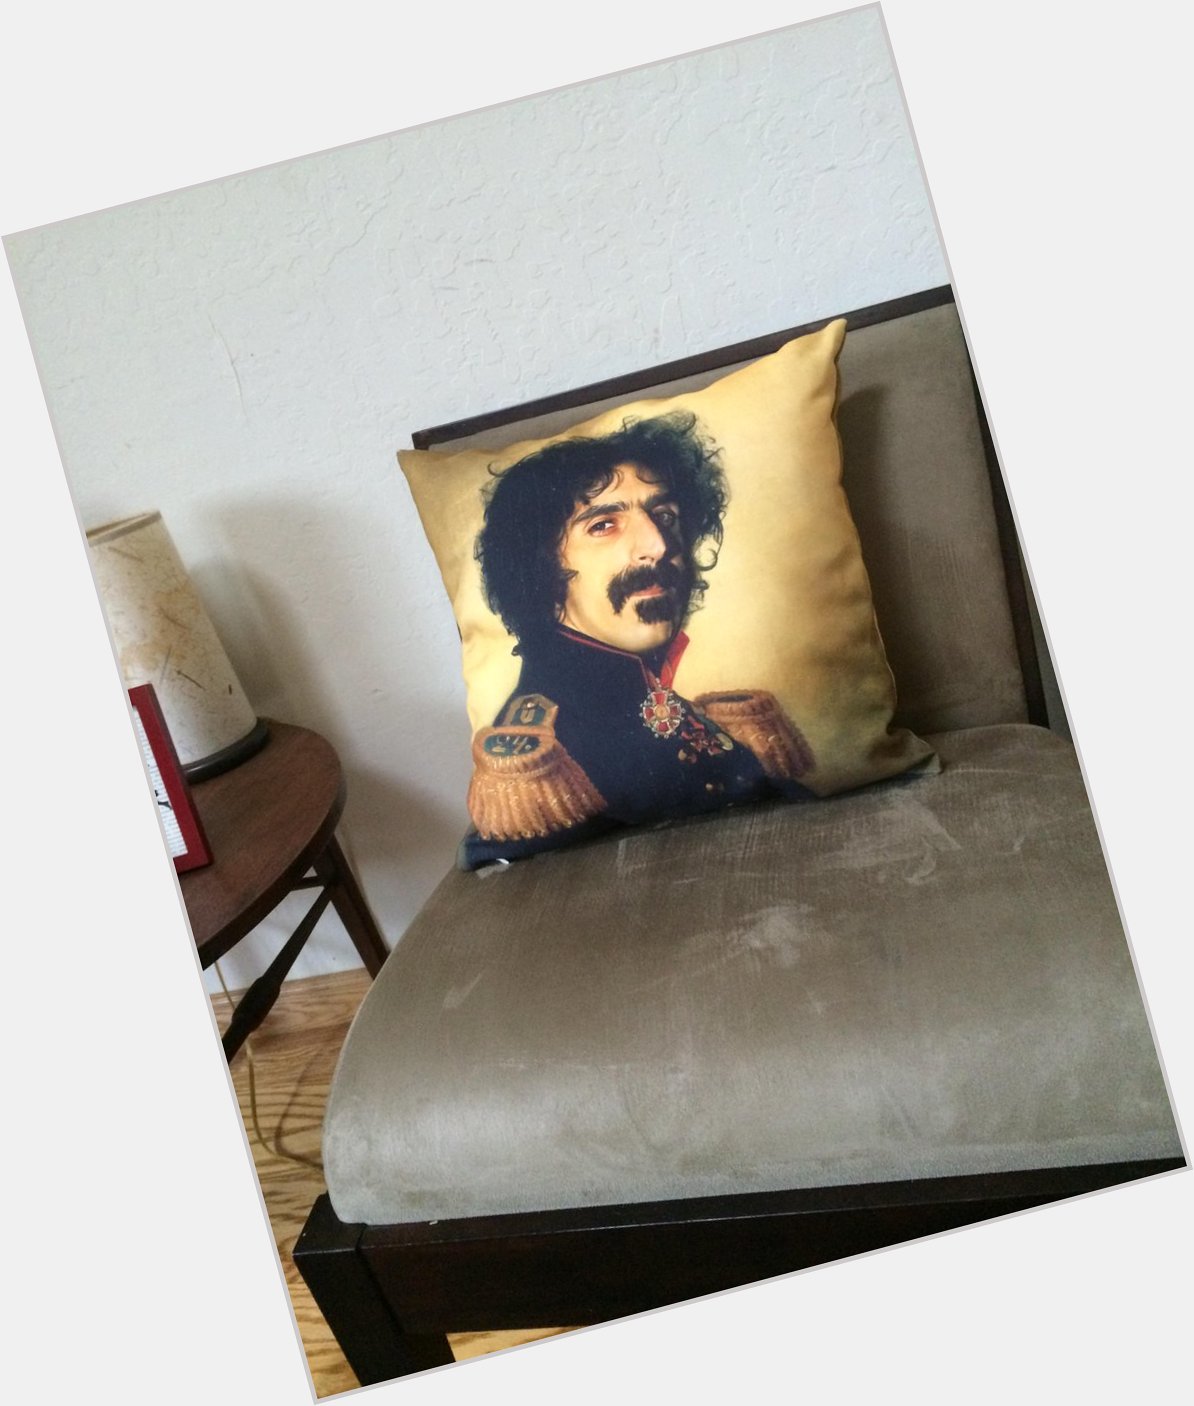 Happy Frank Zappa s Birthday! Look at the awesome pillow my friend gave me. 